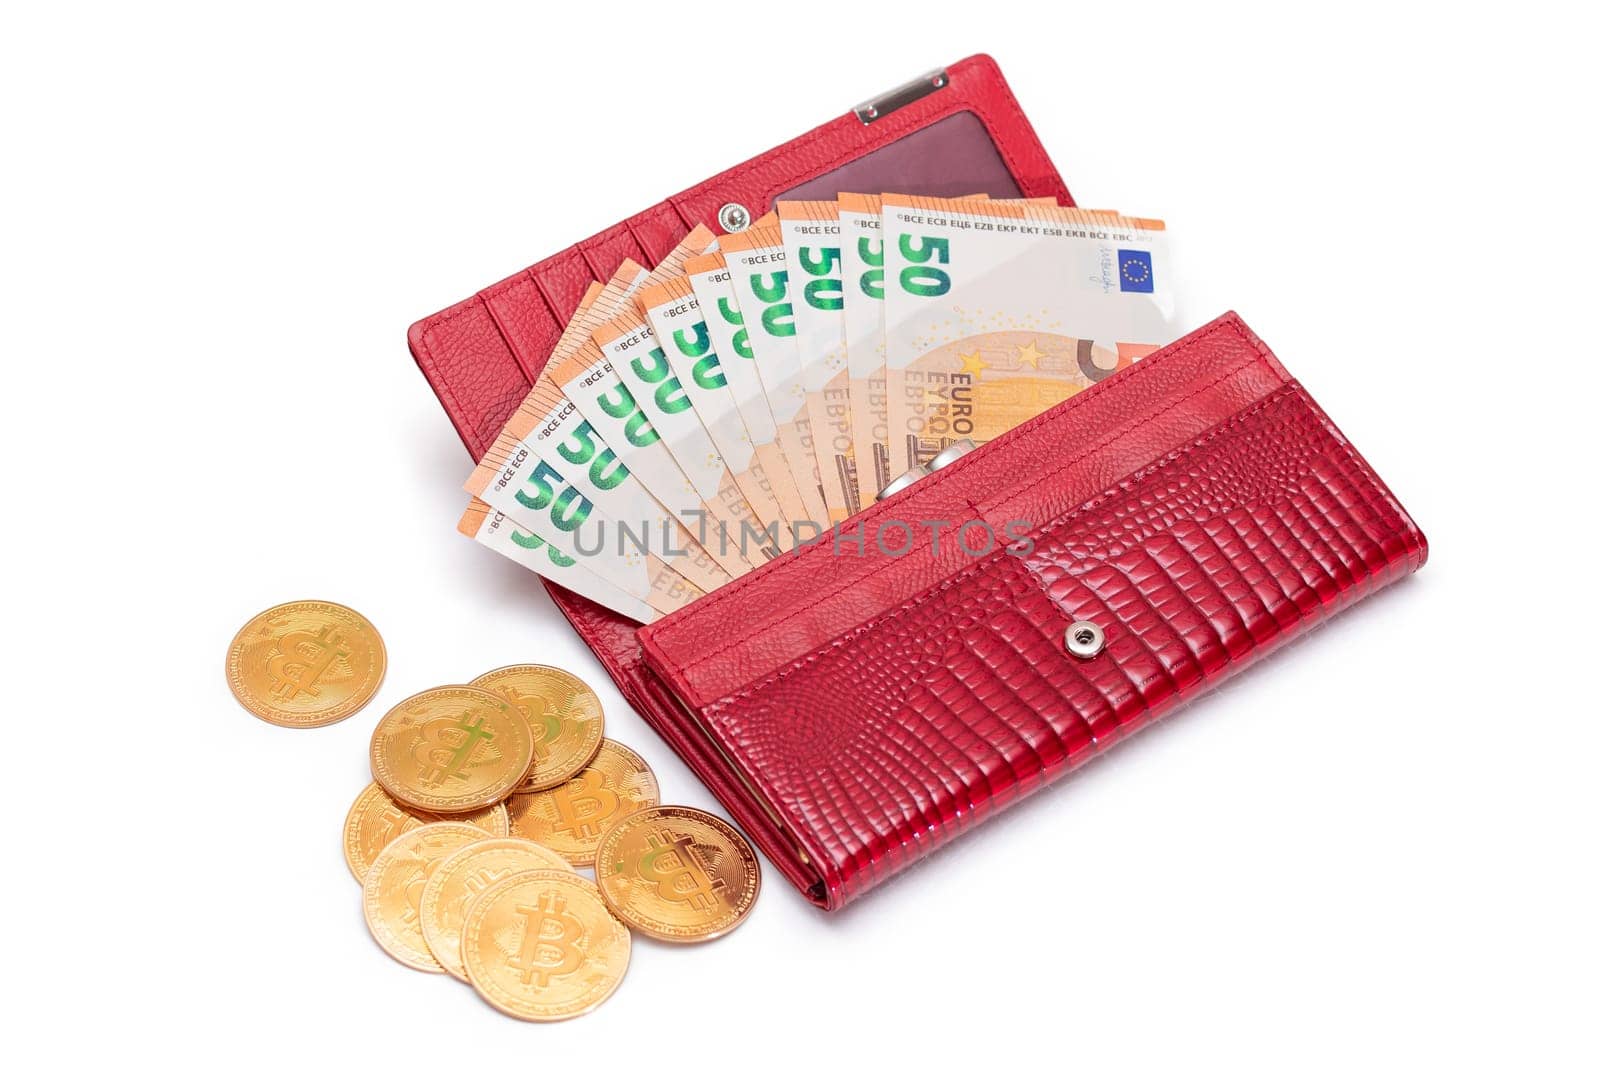 Opened Red Women Purse with 50 Euro Banknotes Inside and Bitcoin Coins - Isolated by InfinitumProdux